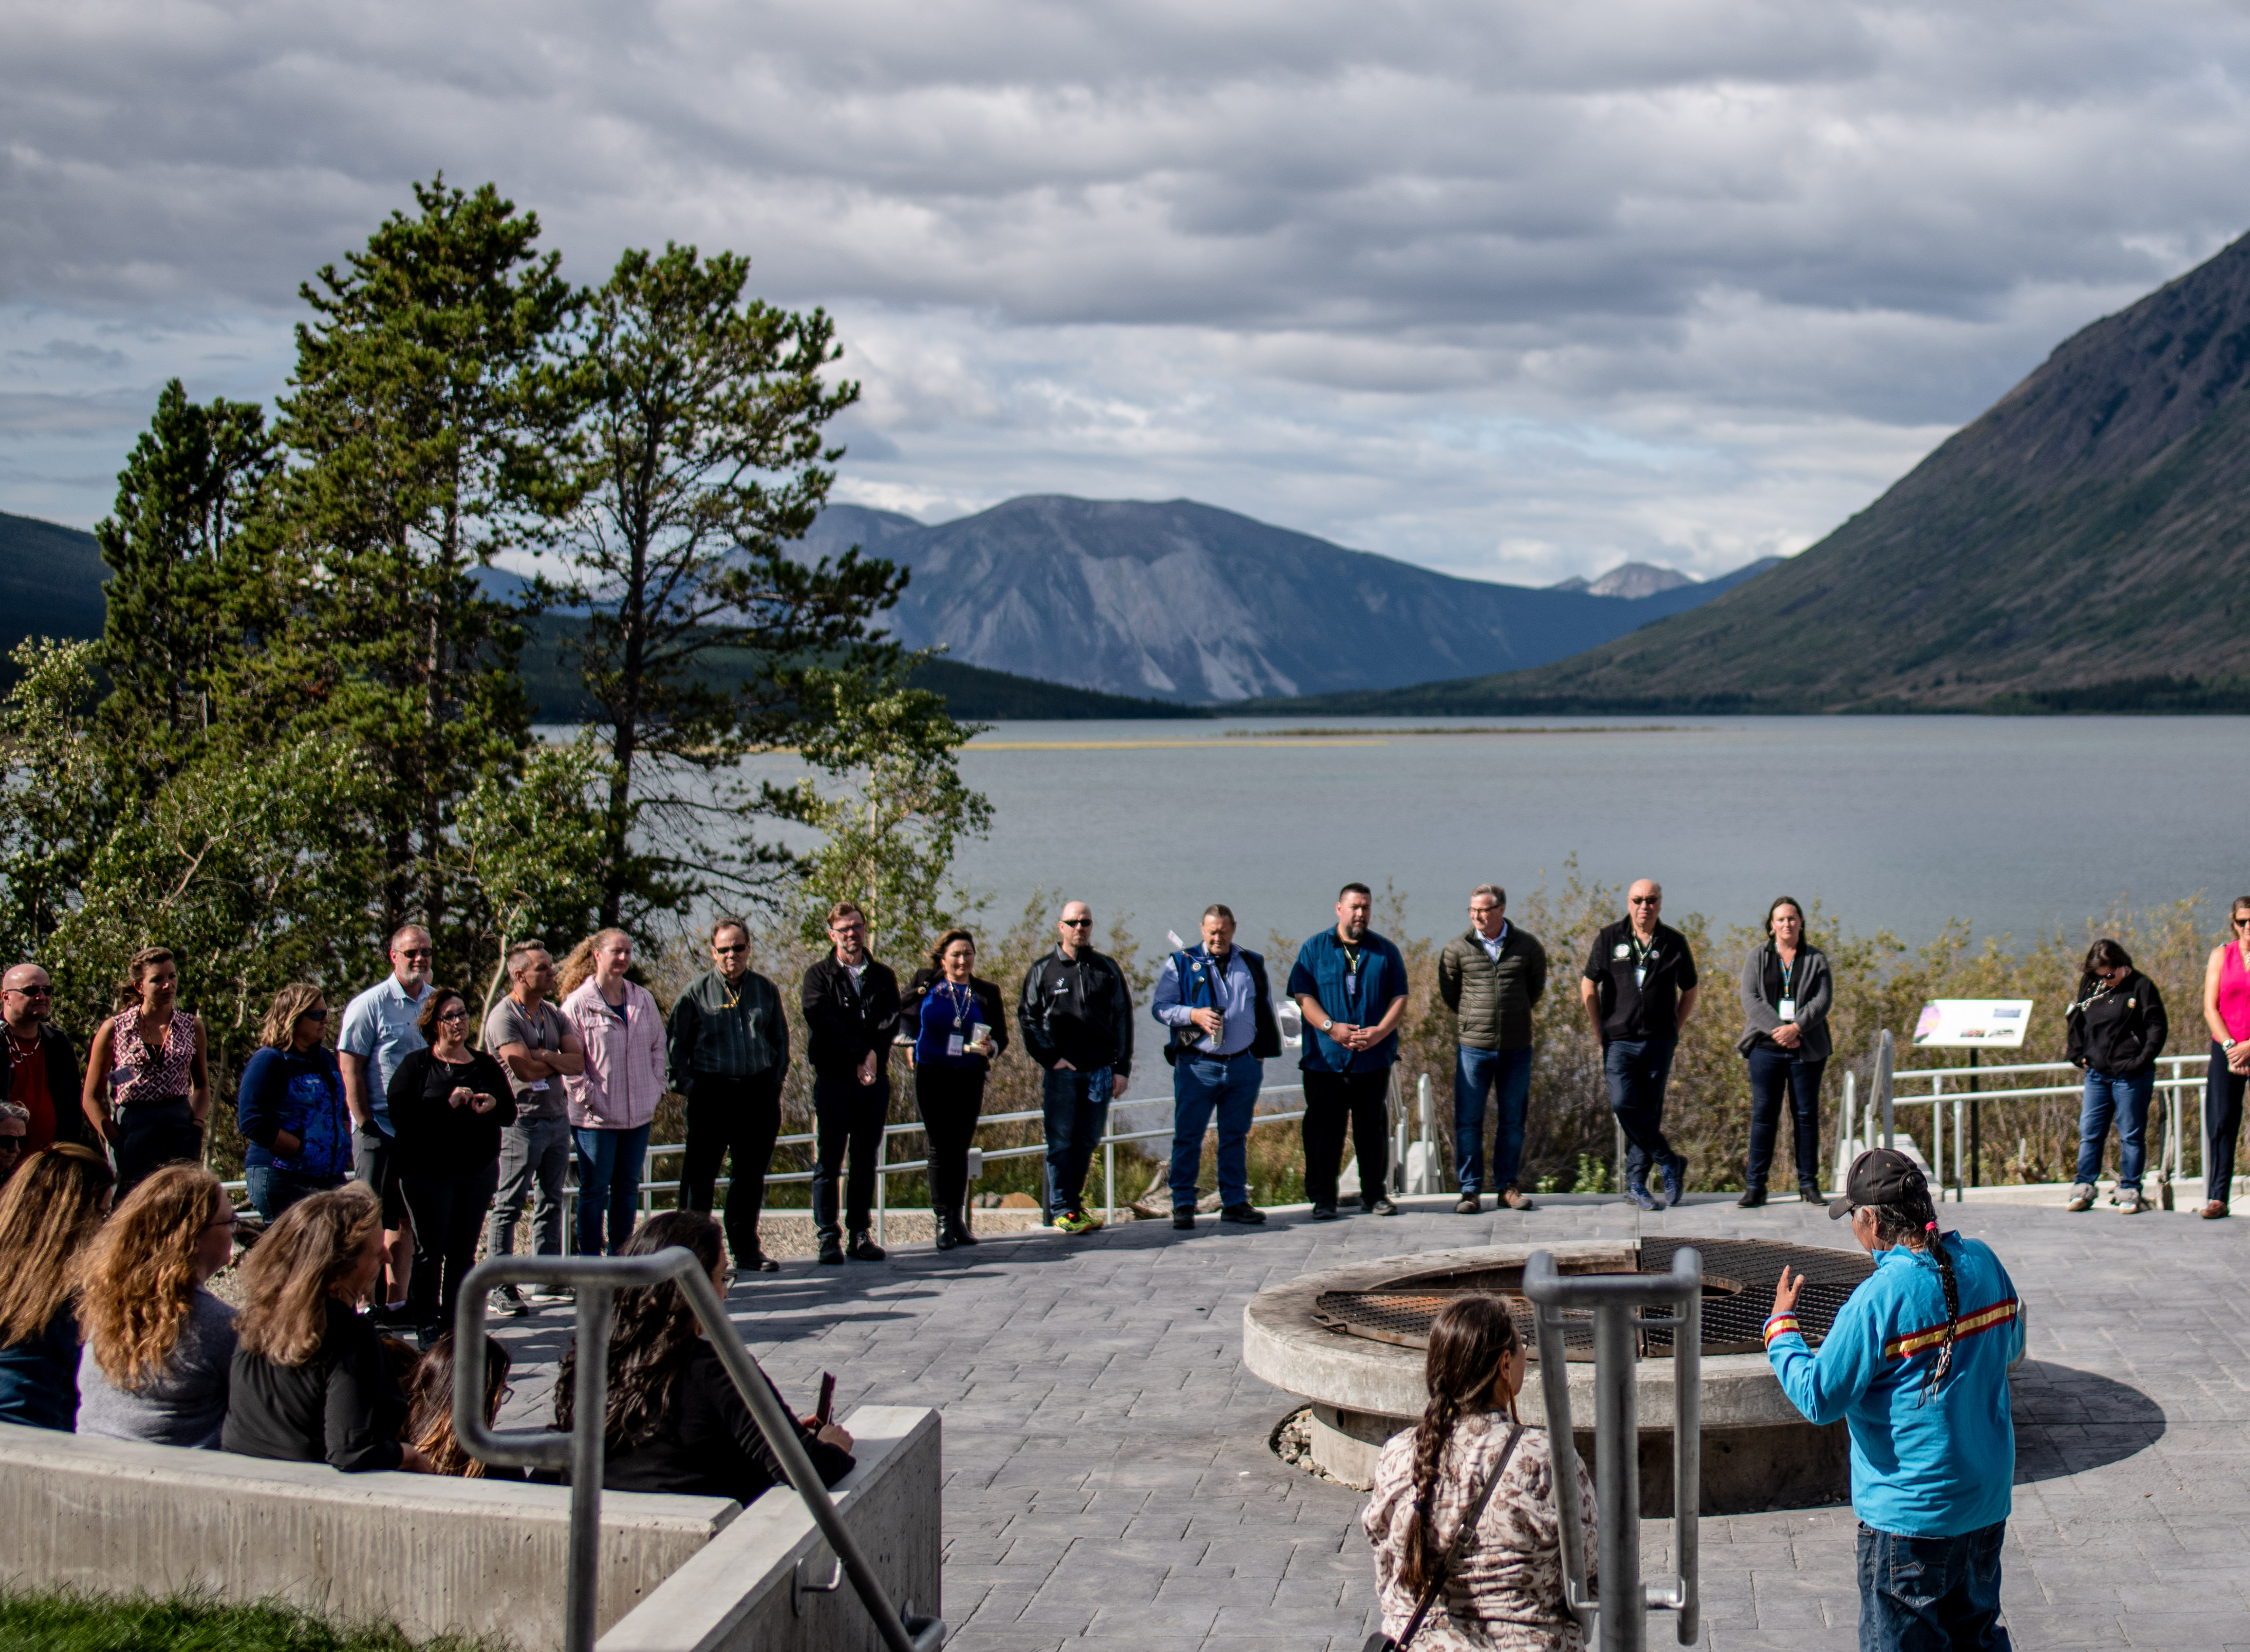 At the border of a lake surrounded by mountains, a large group of individuals stand in a circle around a fire pit. An Indigenous man with a long braid and a woman address them.